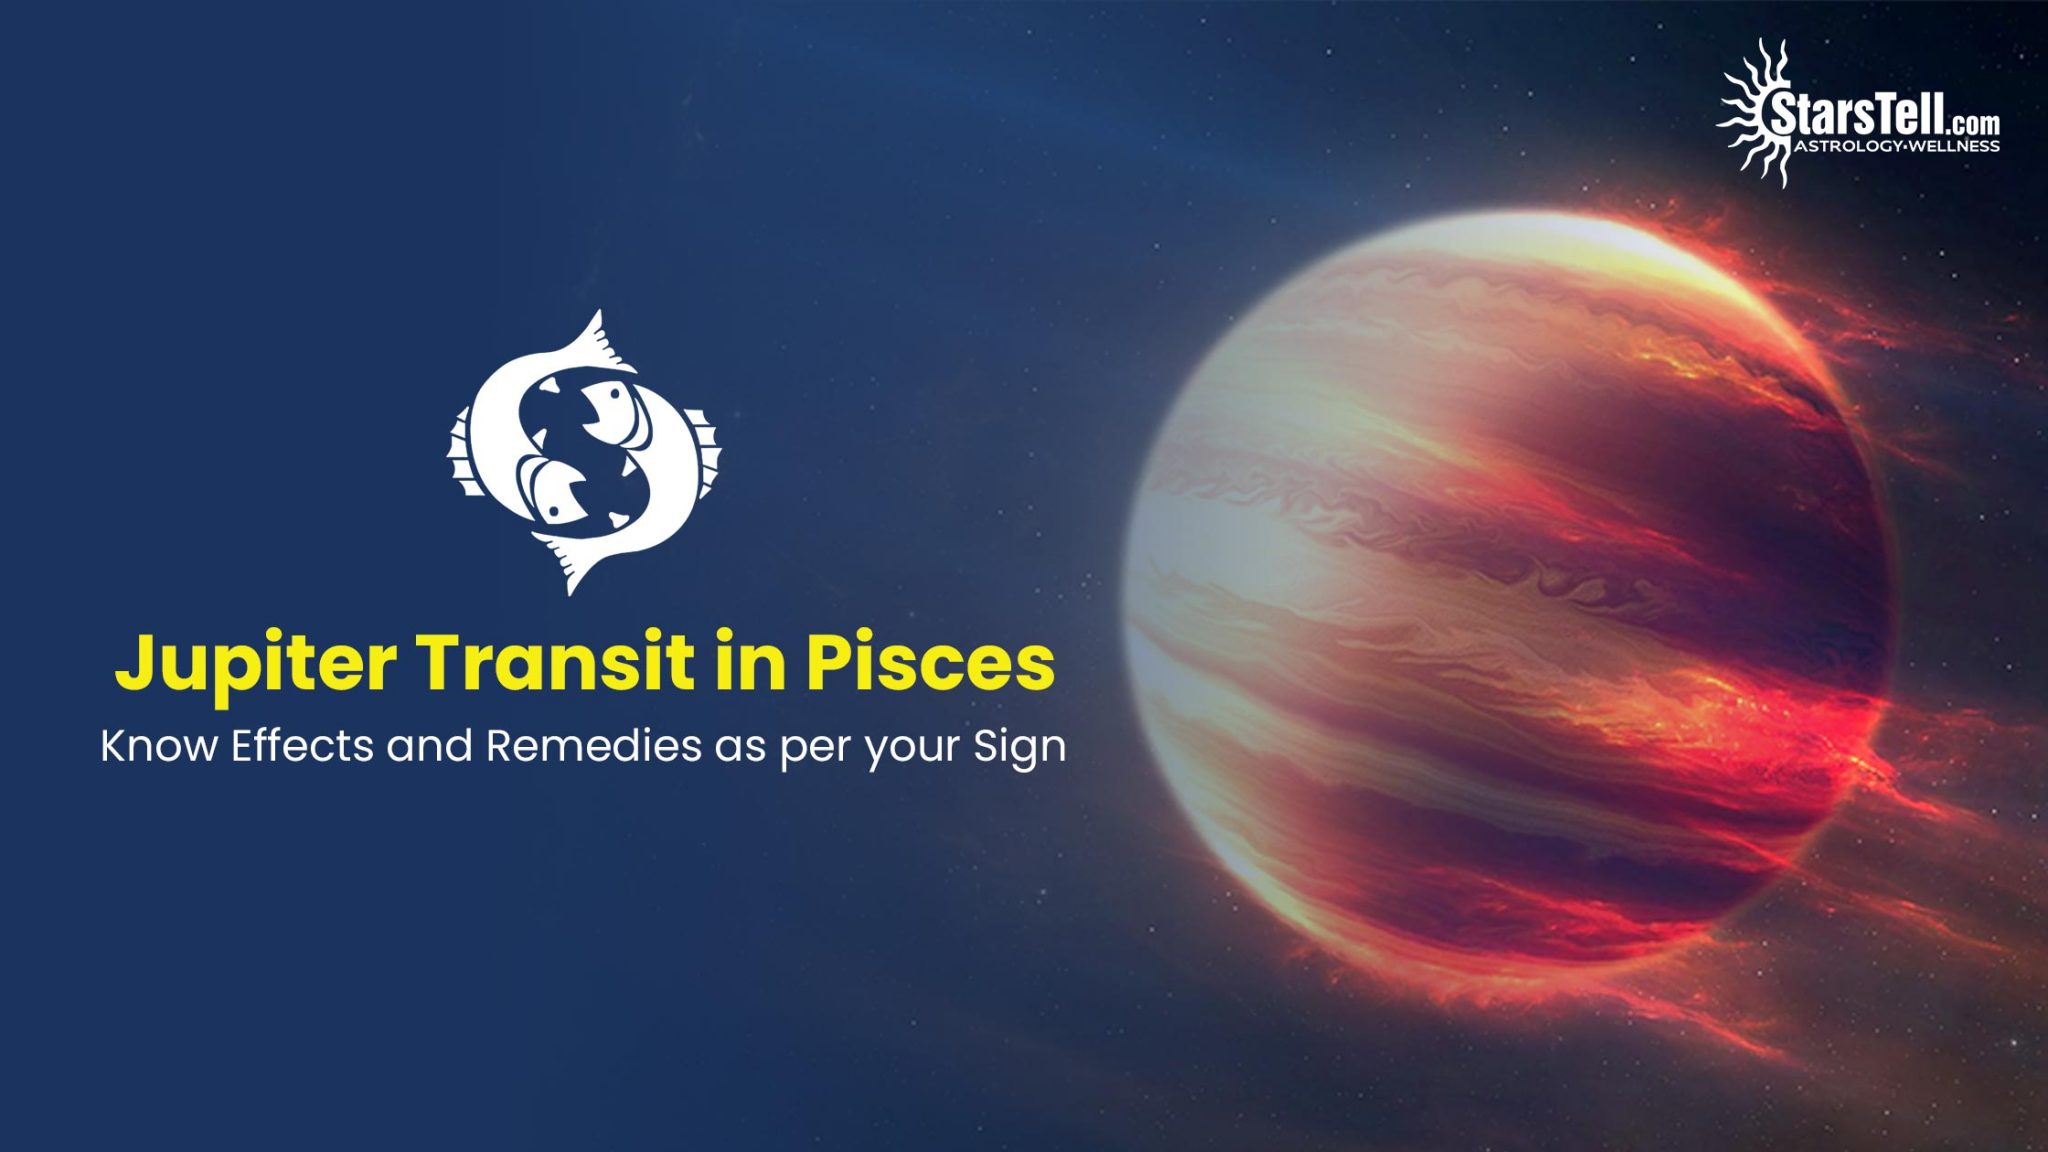 Jupiter Transit in Pisces Know Effects and Remedies as per your Sign